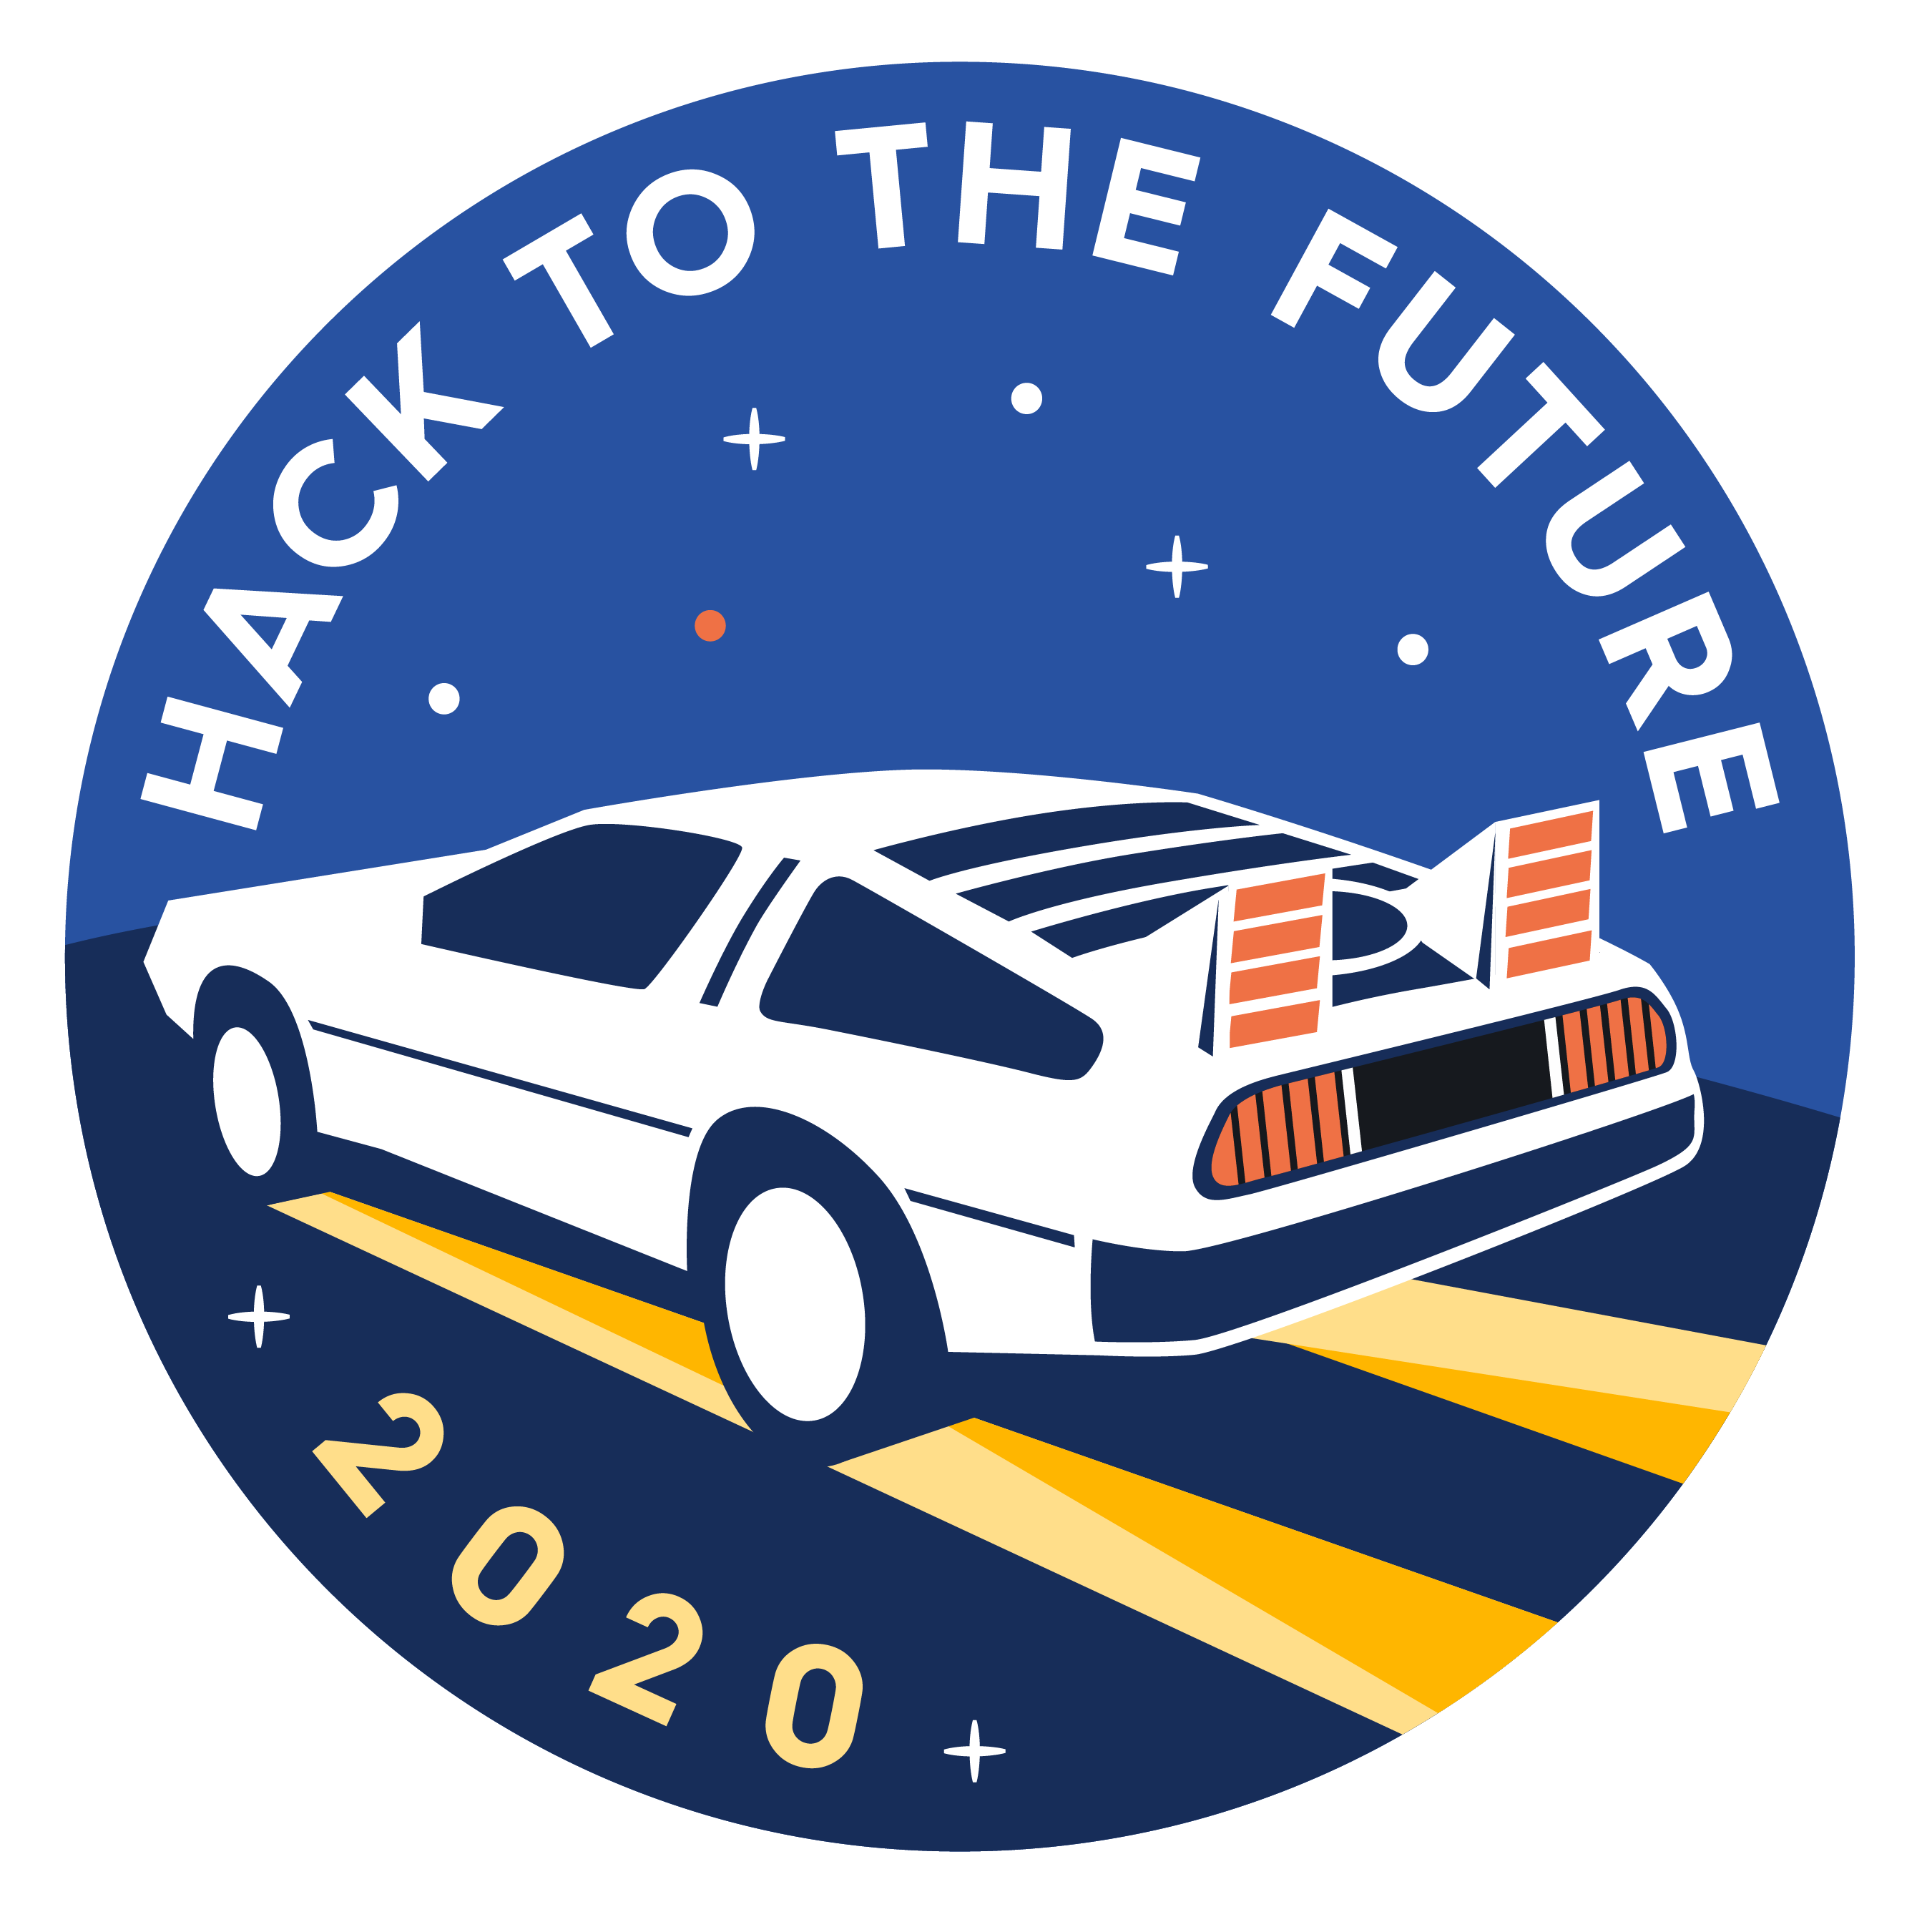 A 2020 embroidered patch with a Back to the Future Theme